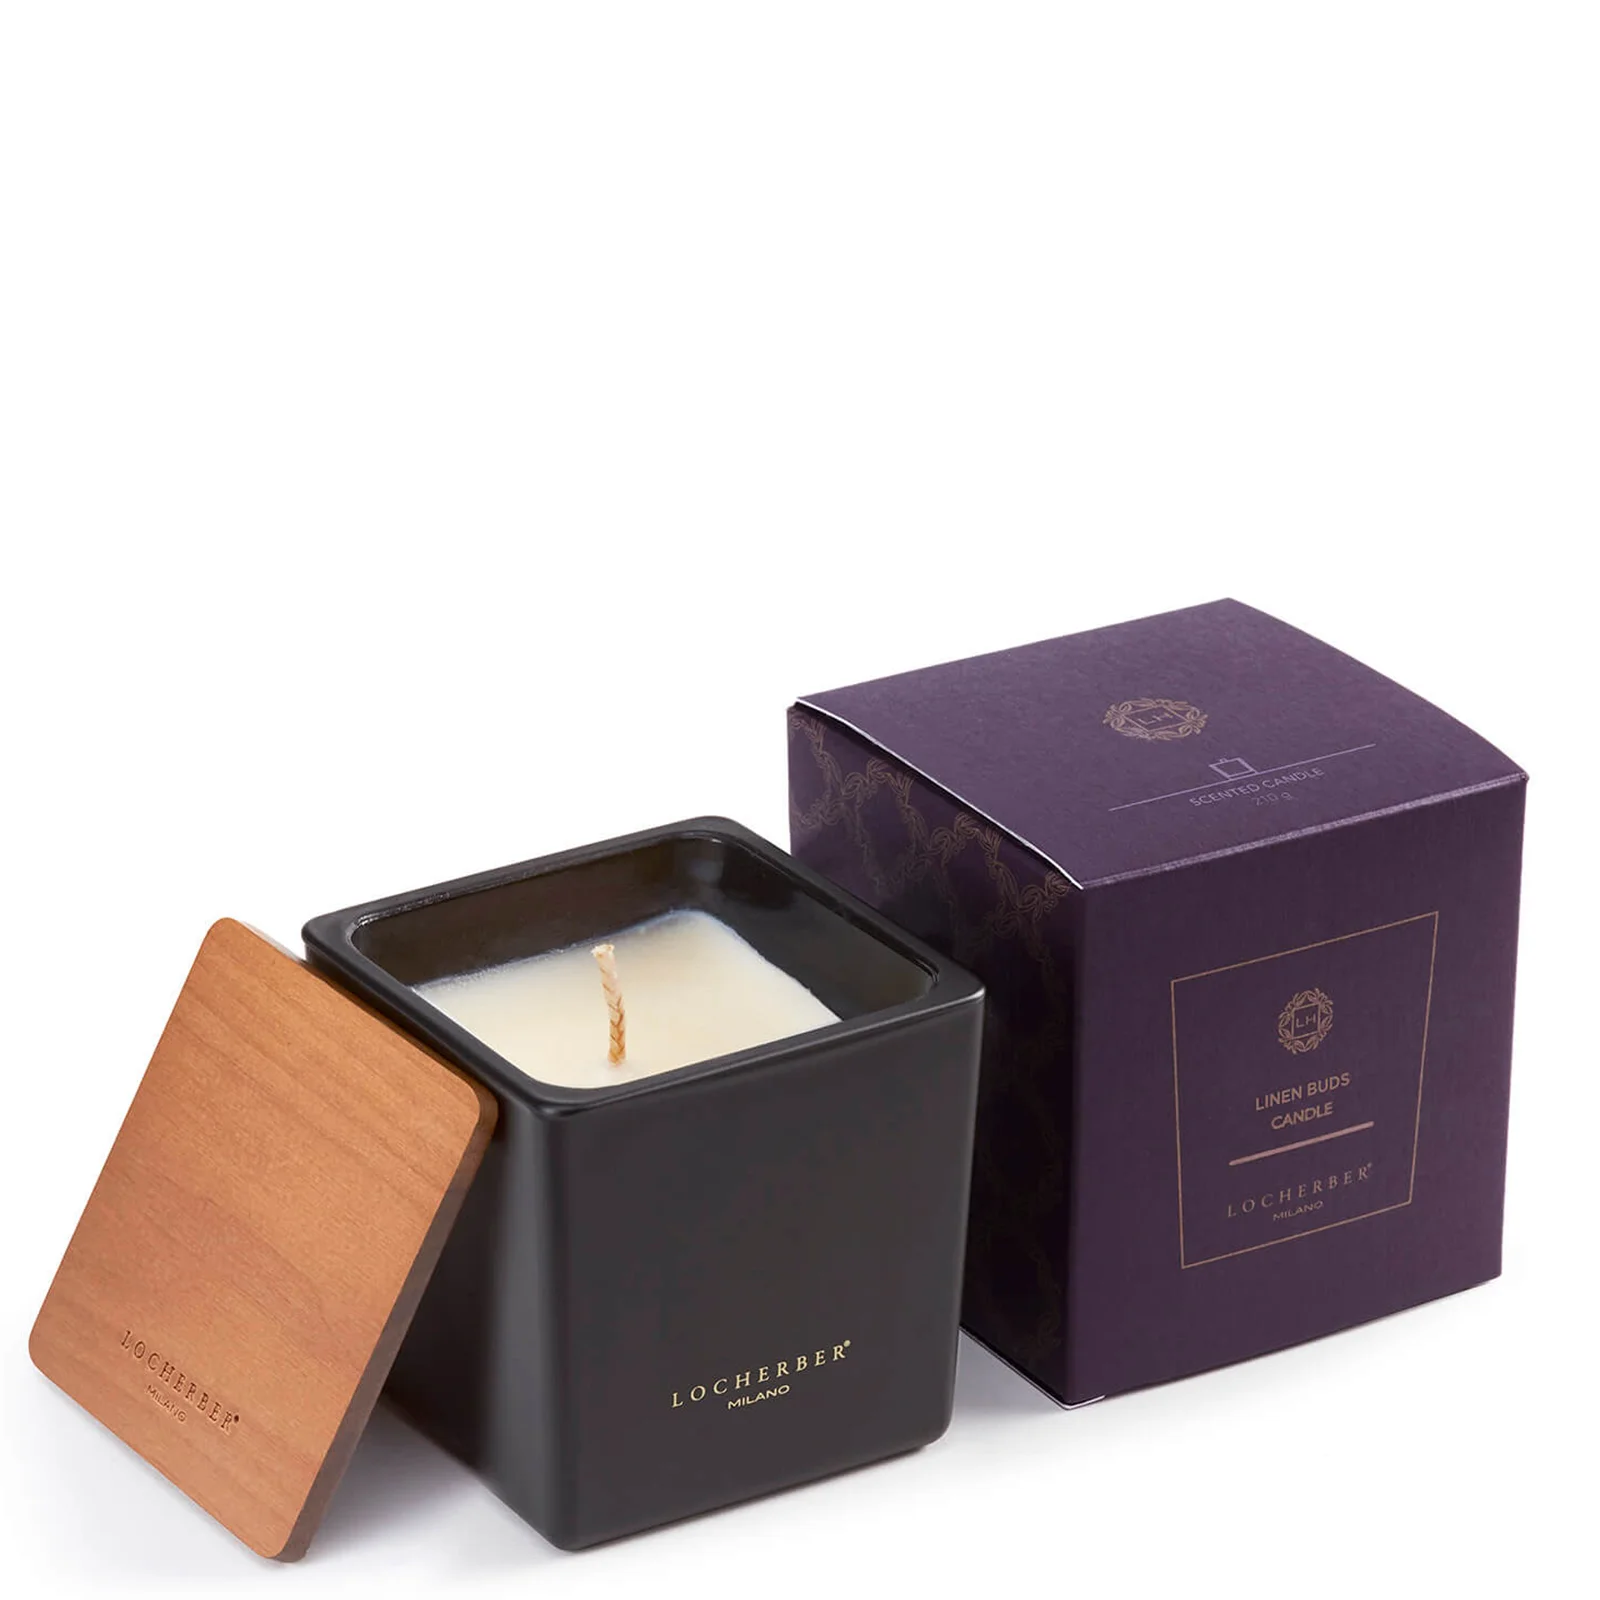 Locherber Linen Buds Scented Candle - 210g Image 1